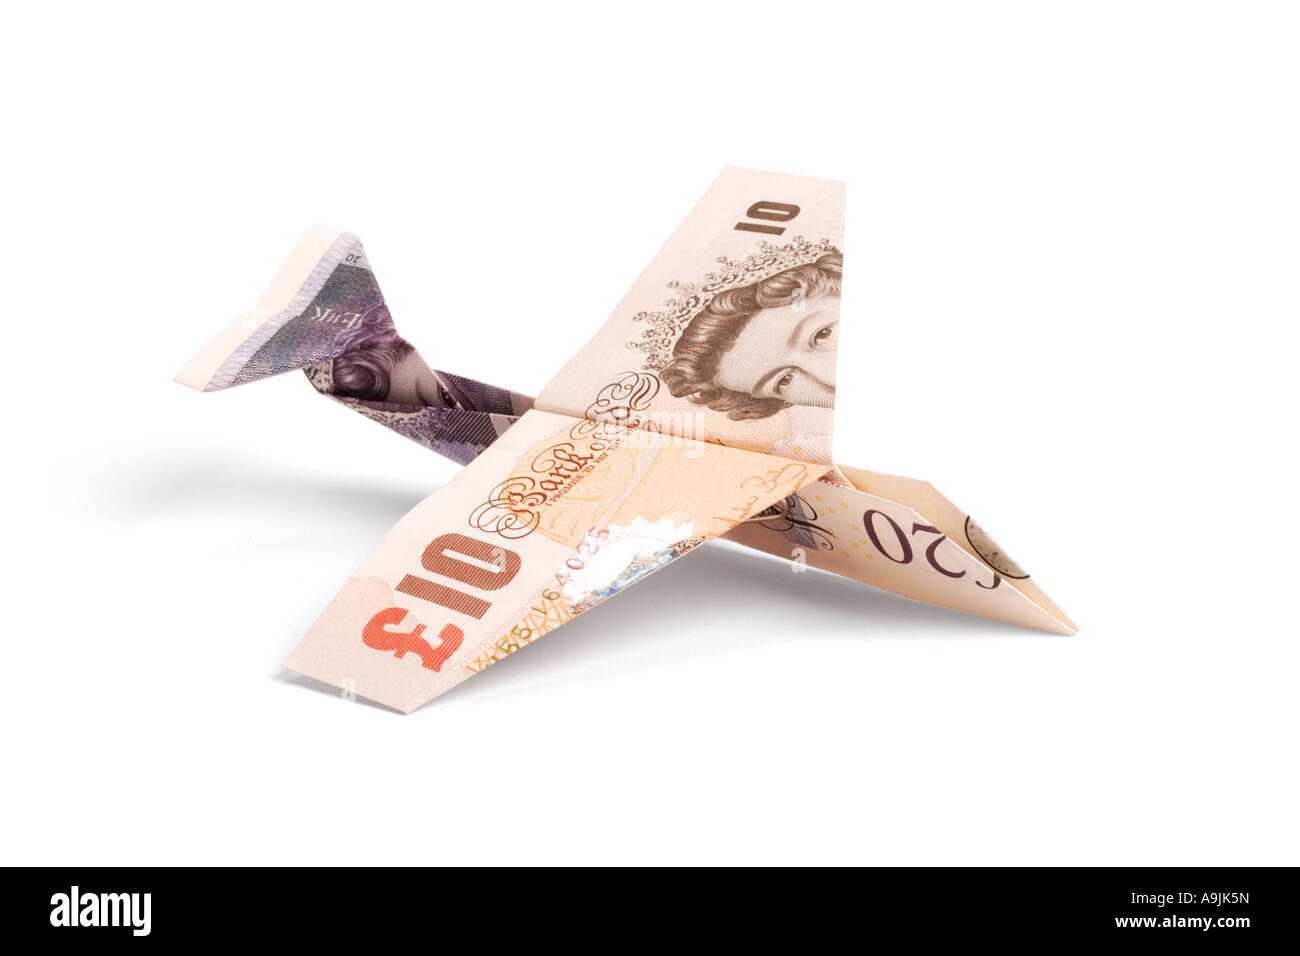 Airplane made of pound notes Stock Photo